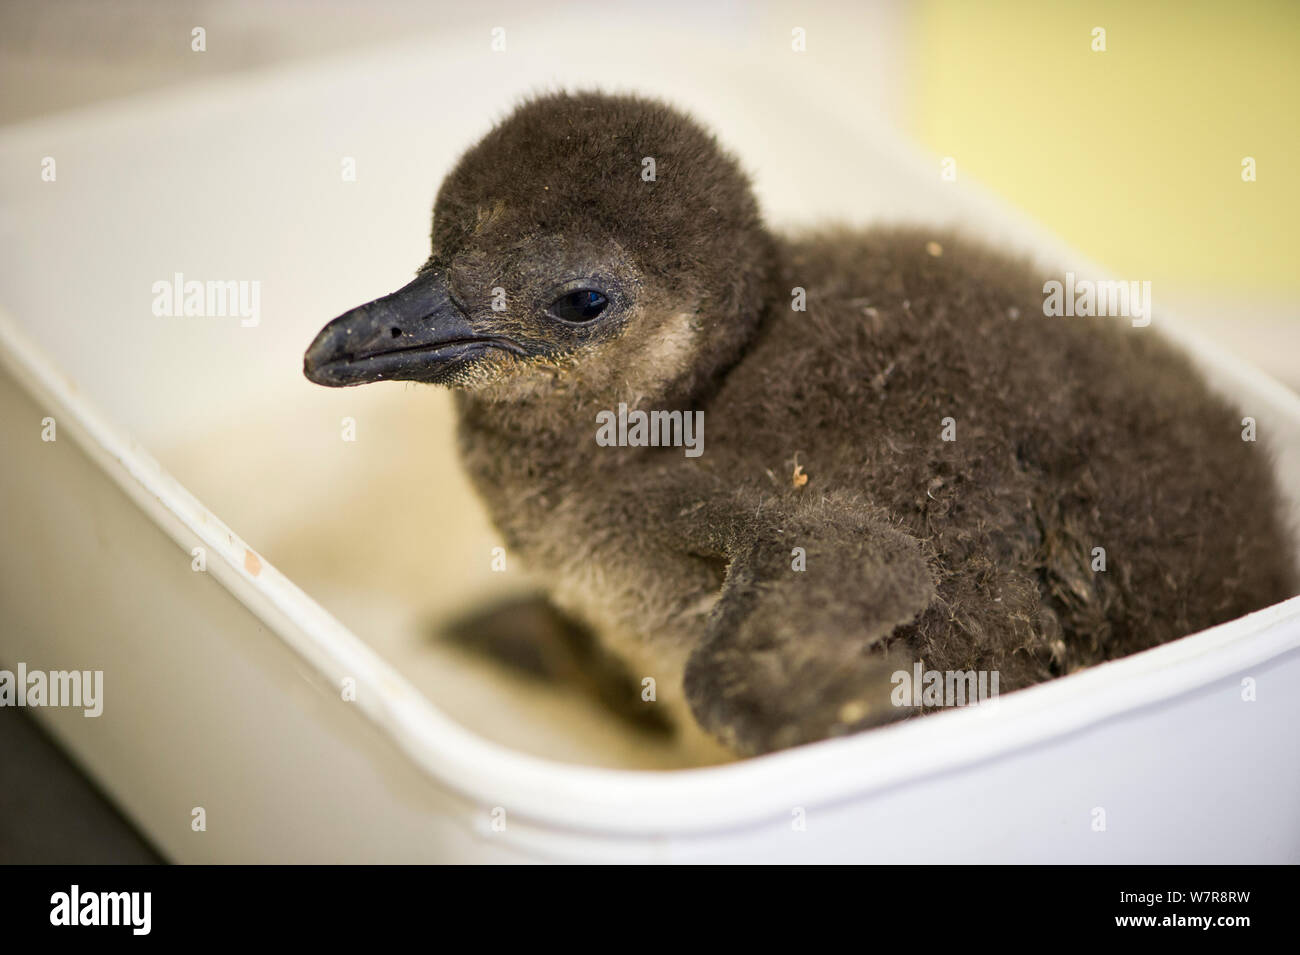 African penguin chick (Spheniscus demersus) being weighed, part of the Chick Bolstering Project, Southern African Foundation for the Conservation of Coastal Birds (SANCCOB), South Africa. May 2012. Stock Photo